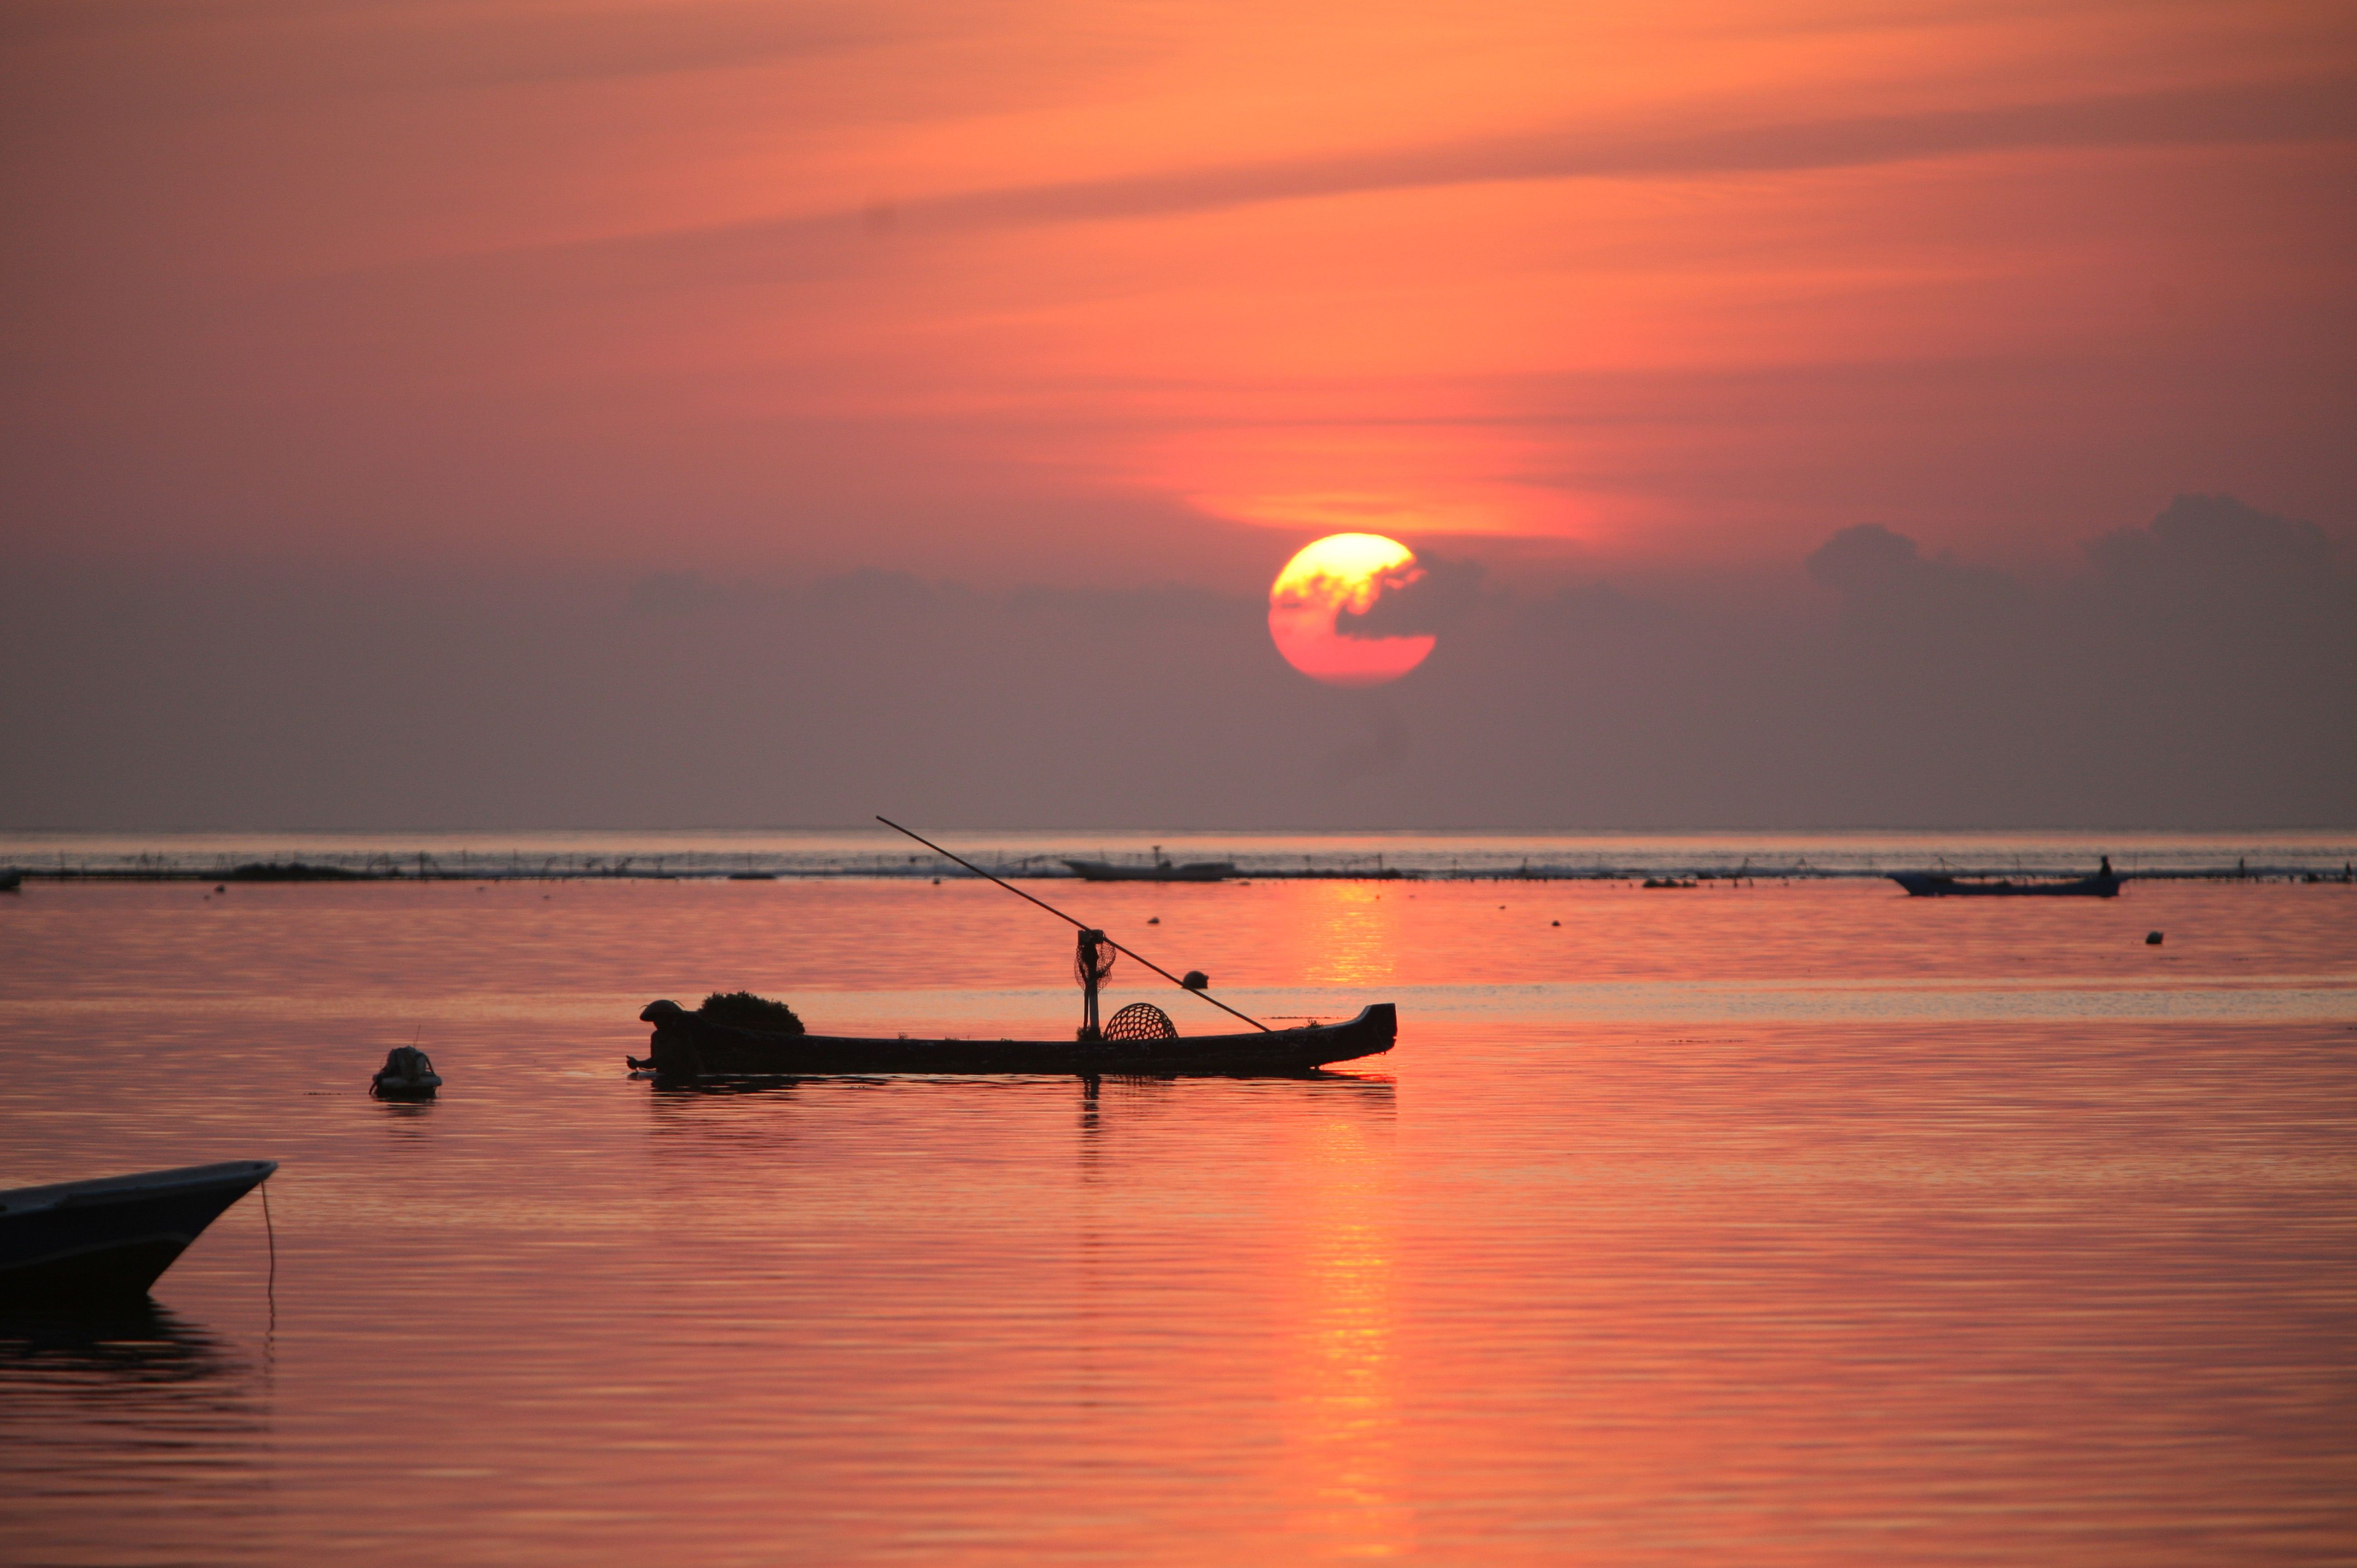 Indonesian boats on flat sea at red sky sunset in Nusa Lembongan, Bali.